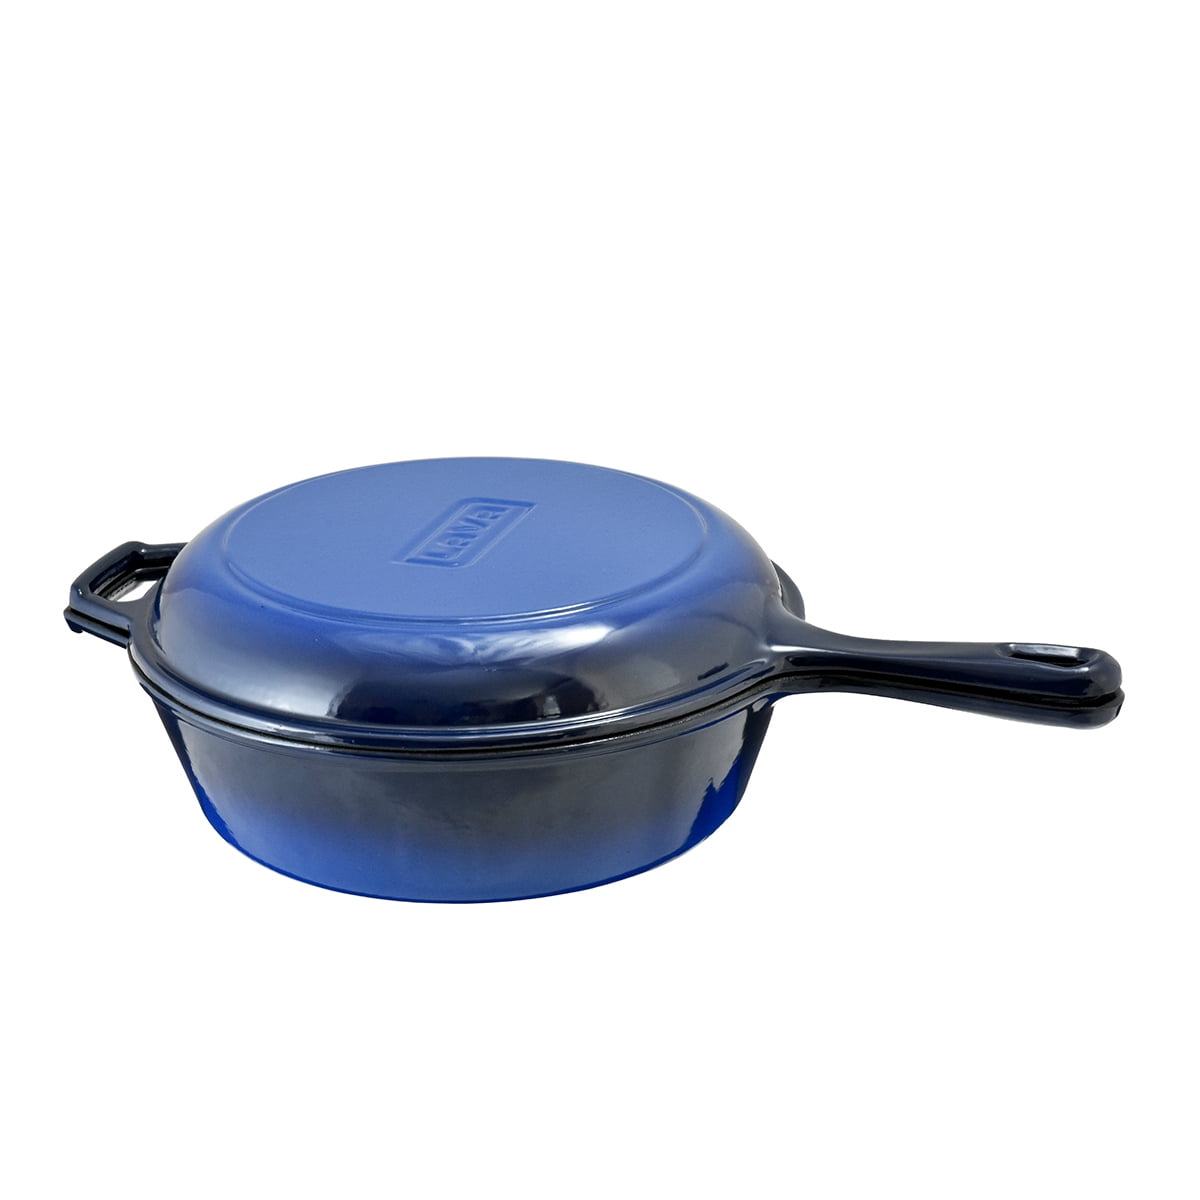 Happycall Double Pan Double-Sided Non-Stick Omelette Pan - Walmart.com